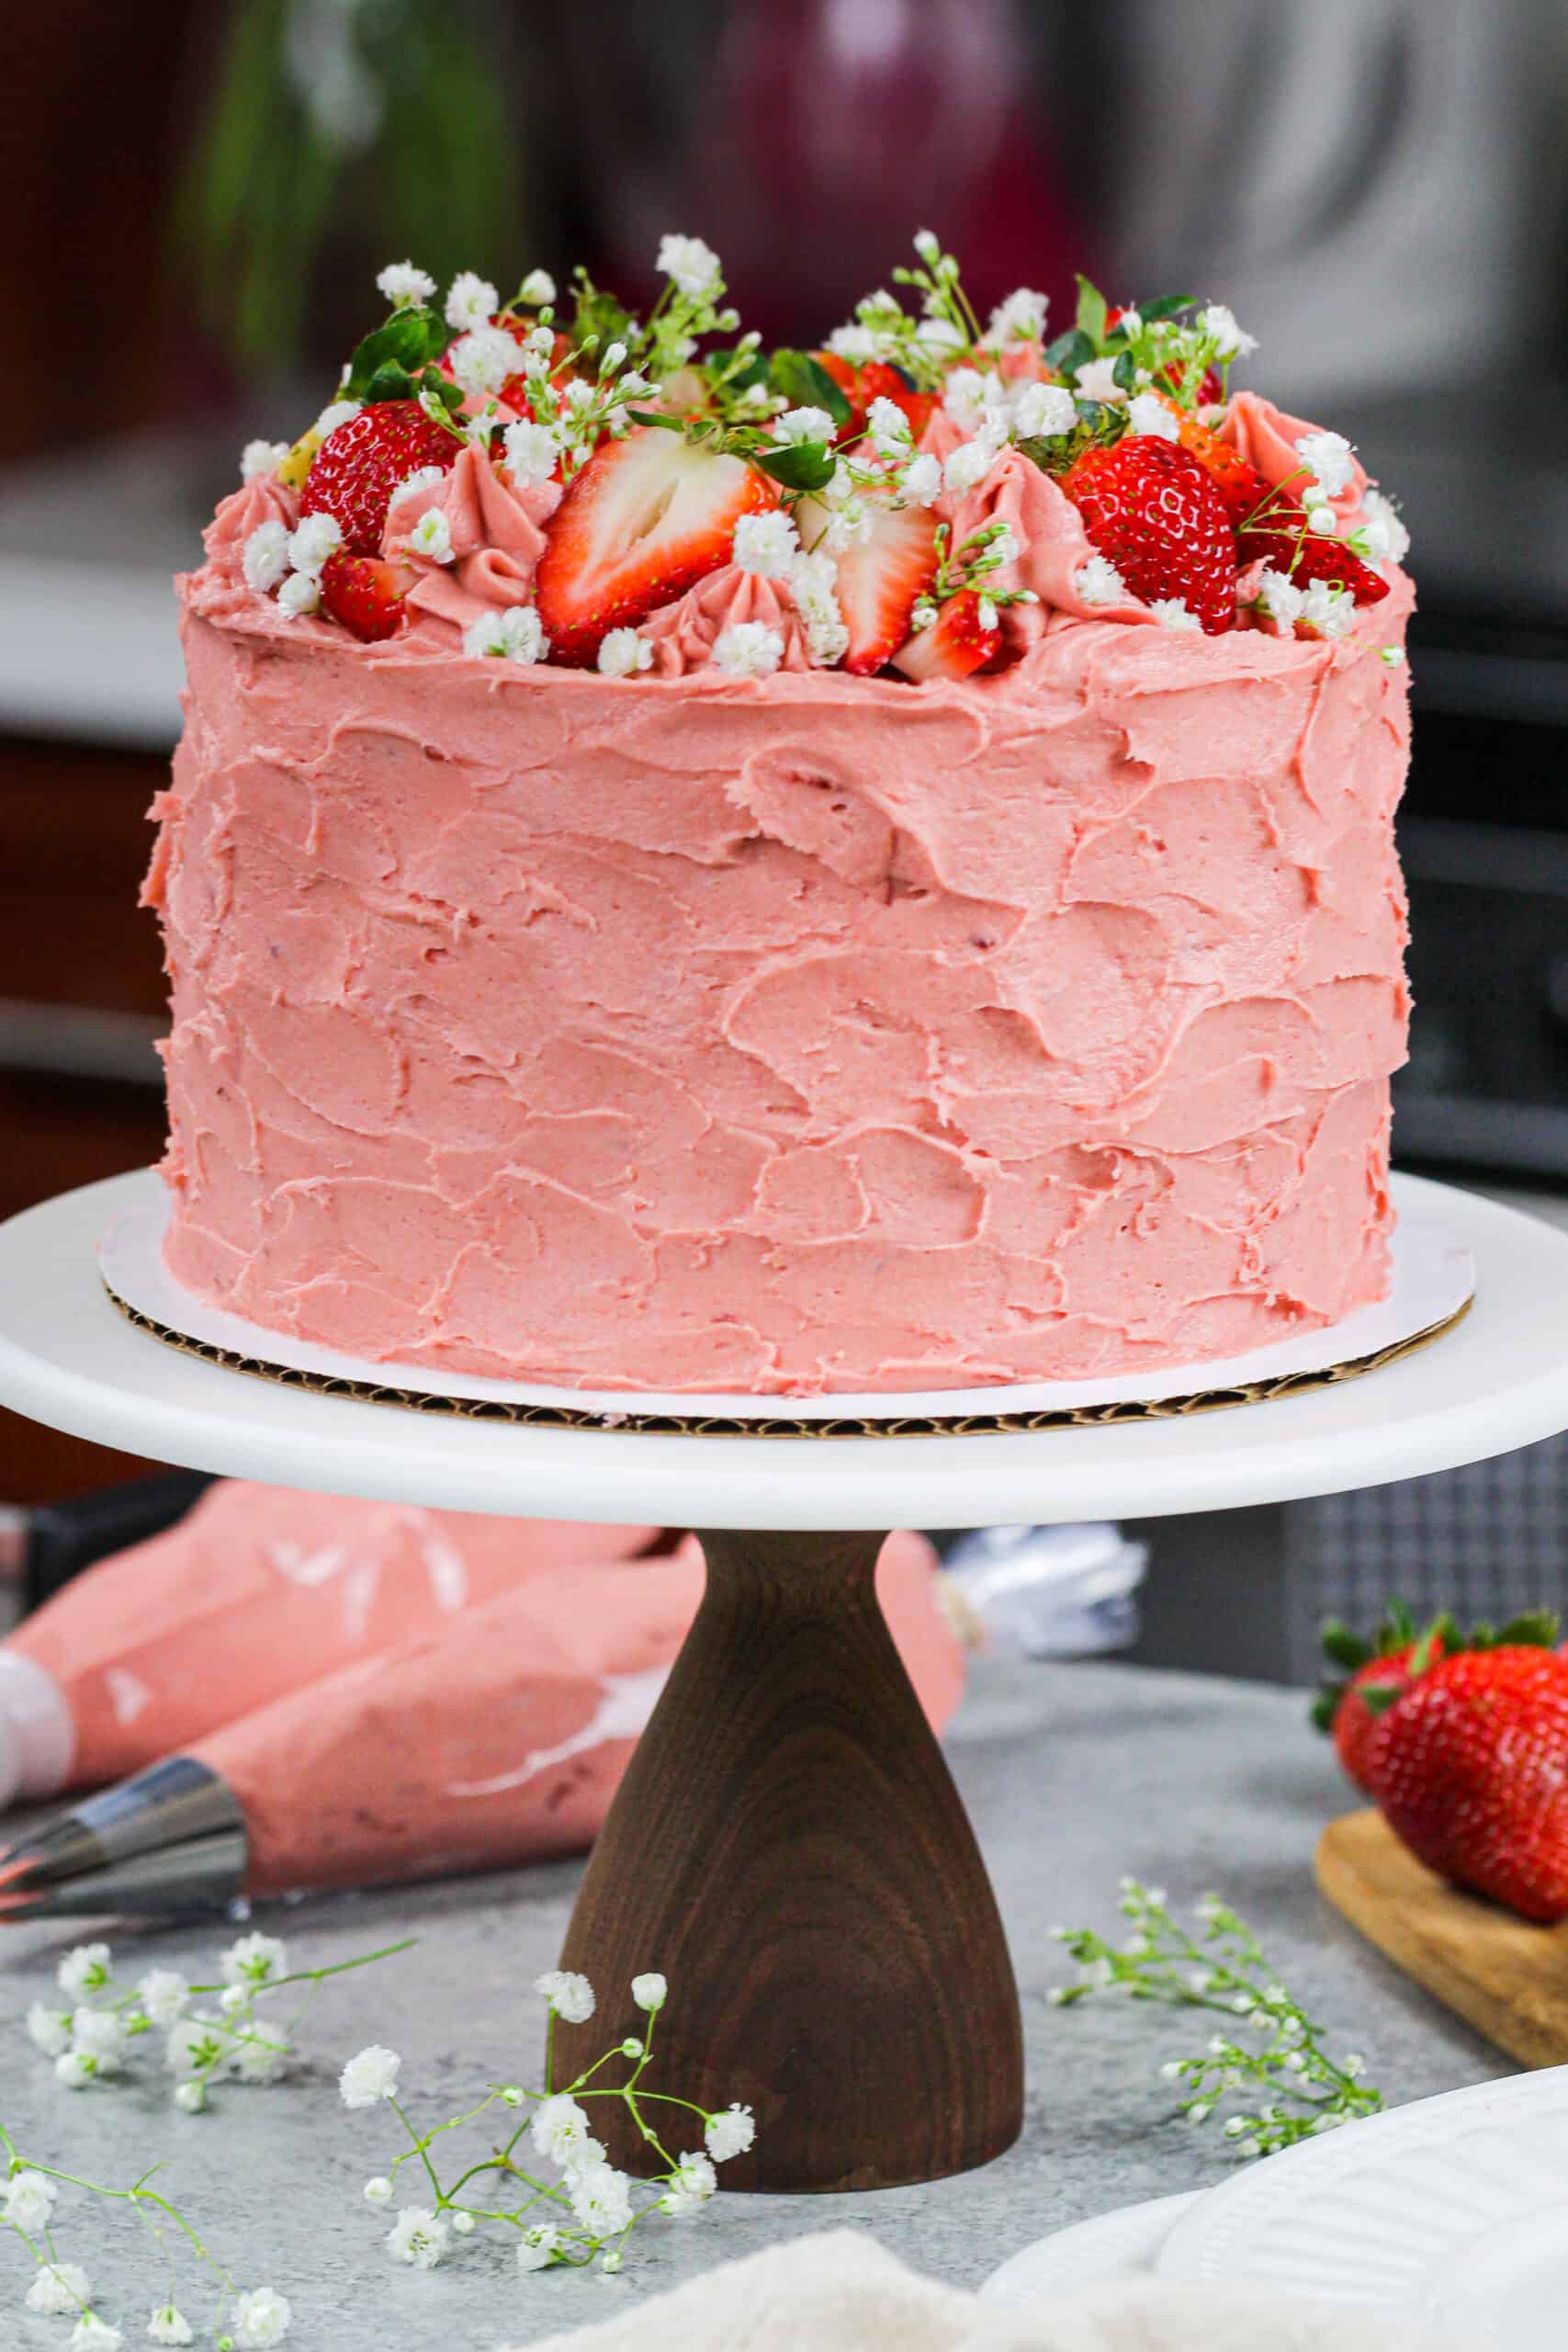 Strawberry Layered Cake - The Frozen Biscuit